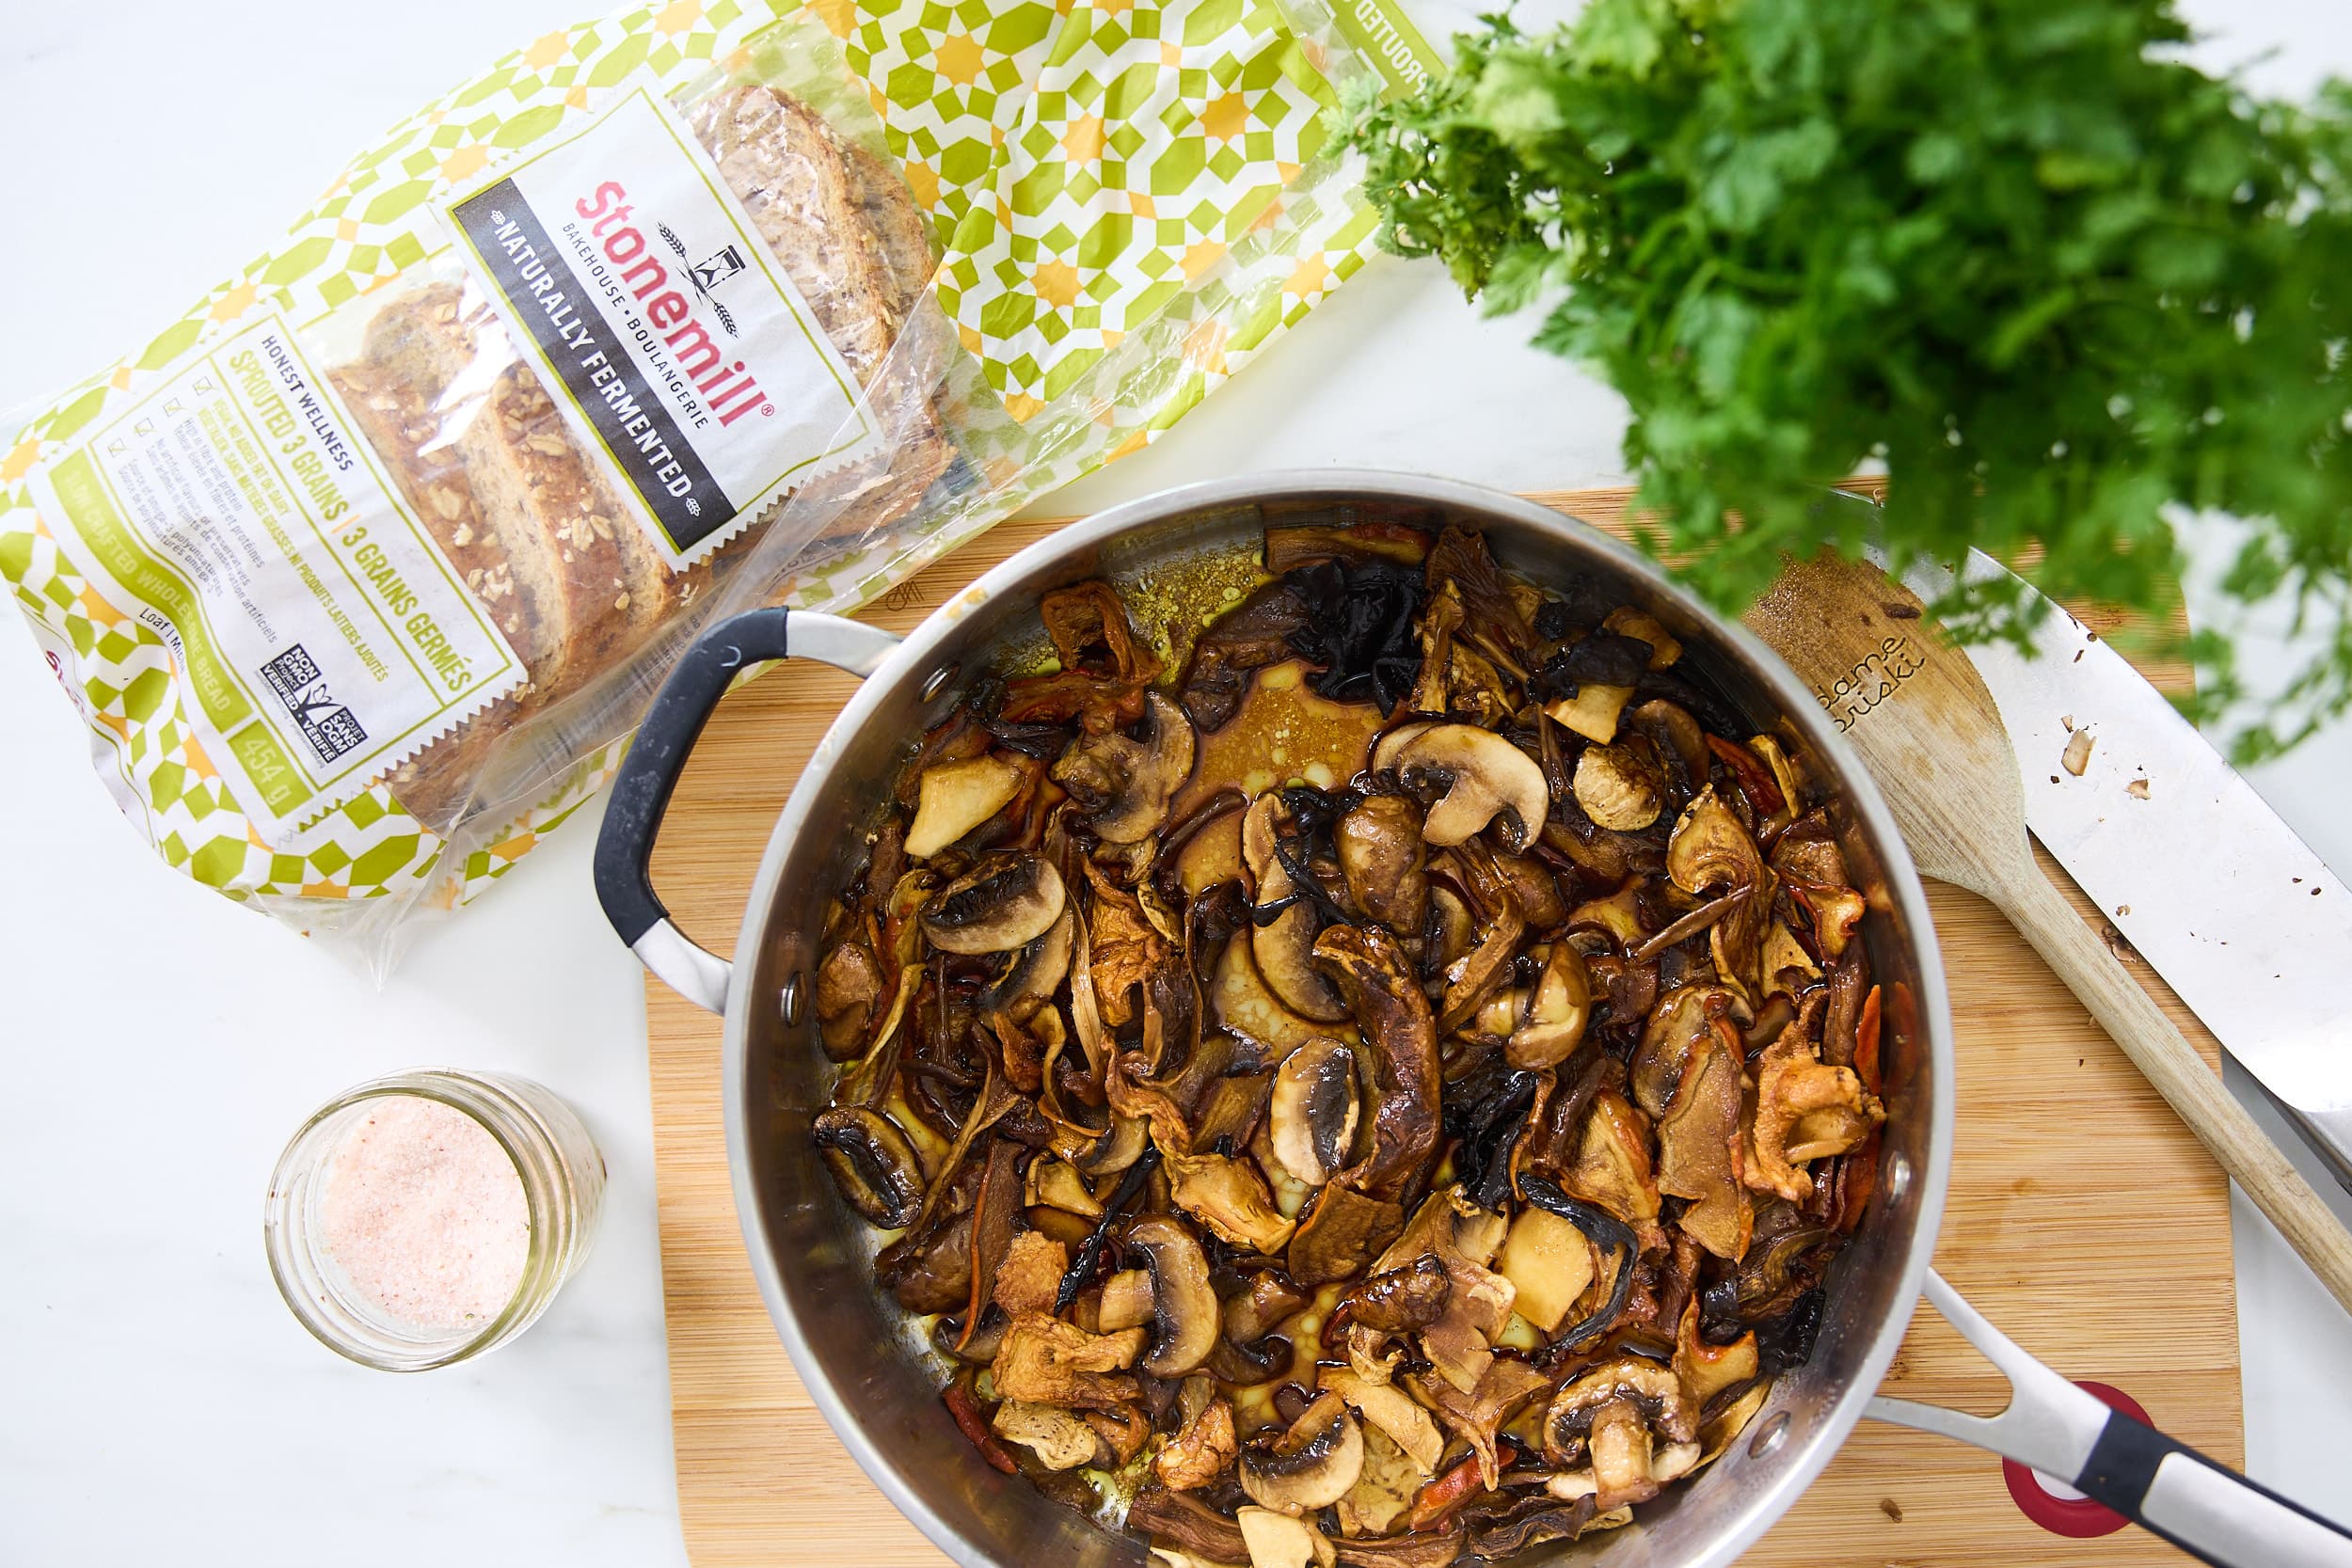 Mushrooms on a pan with a loaf of bread